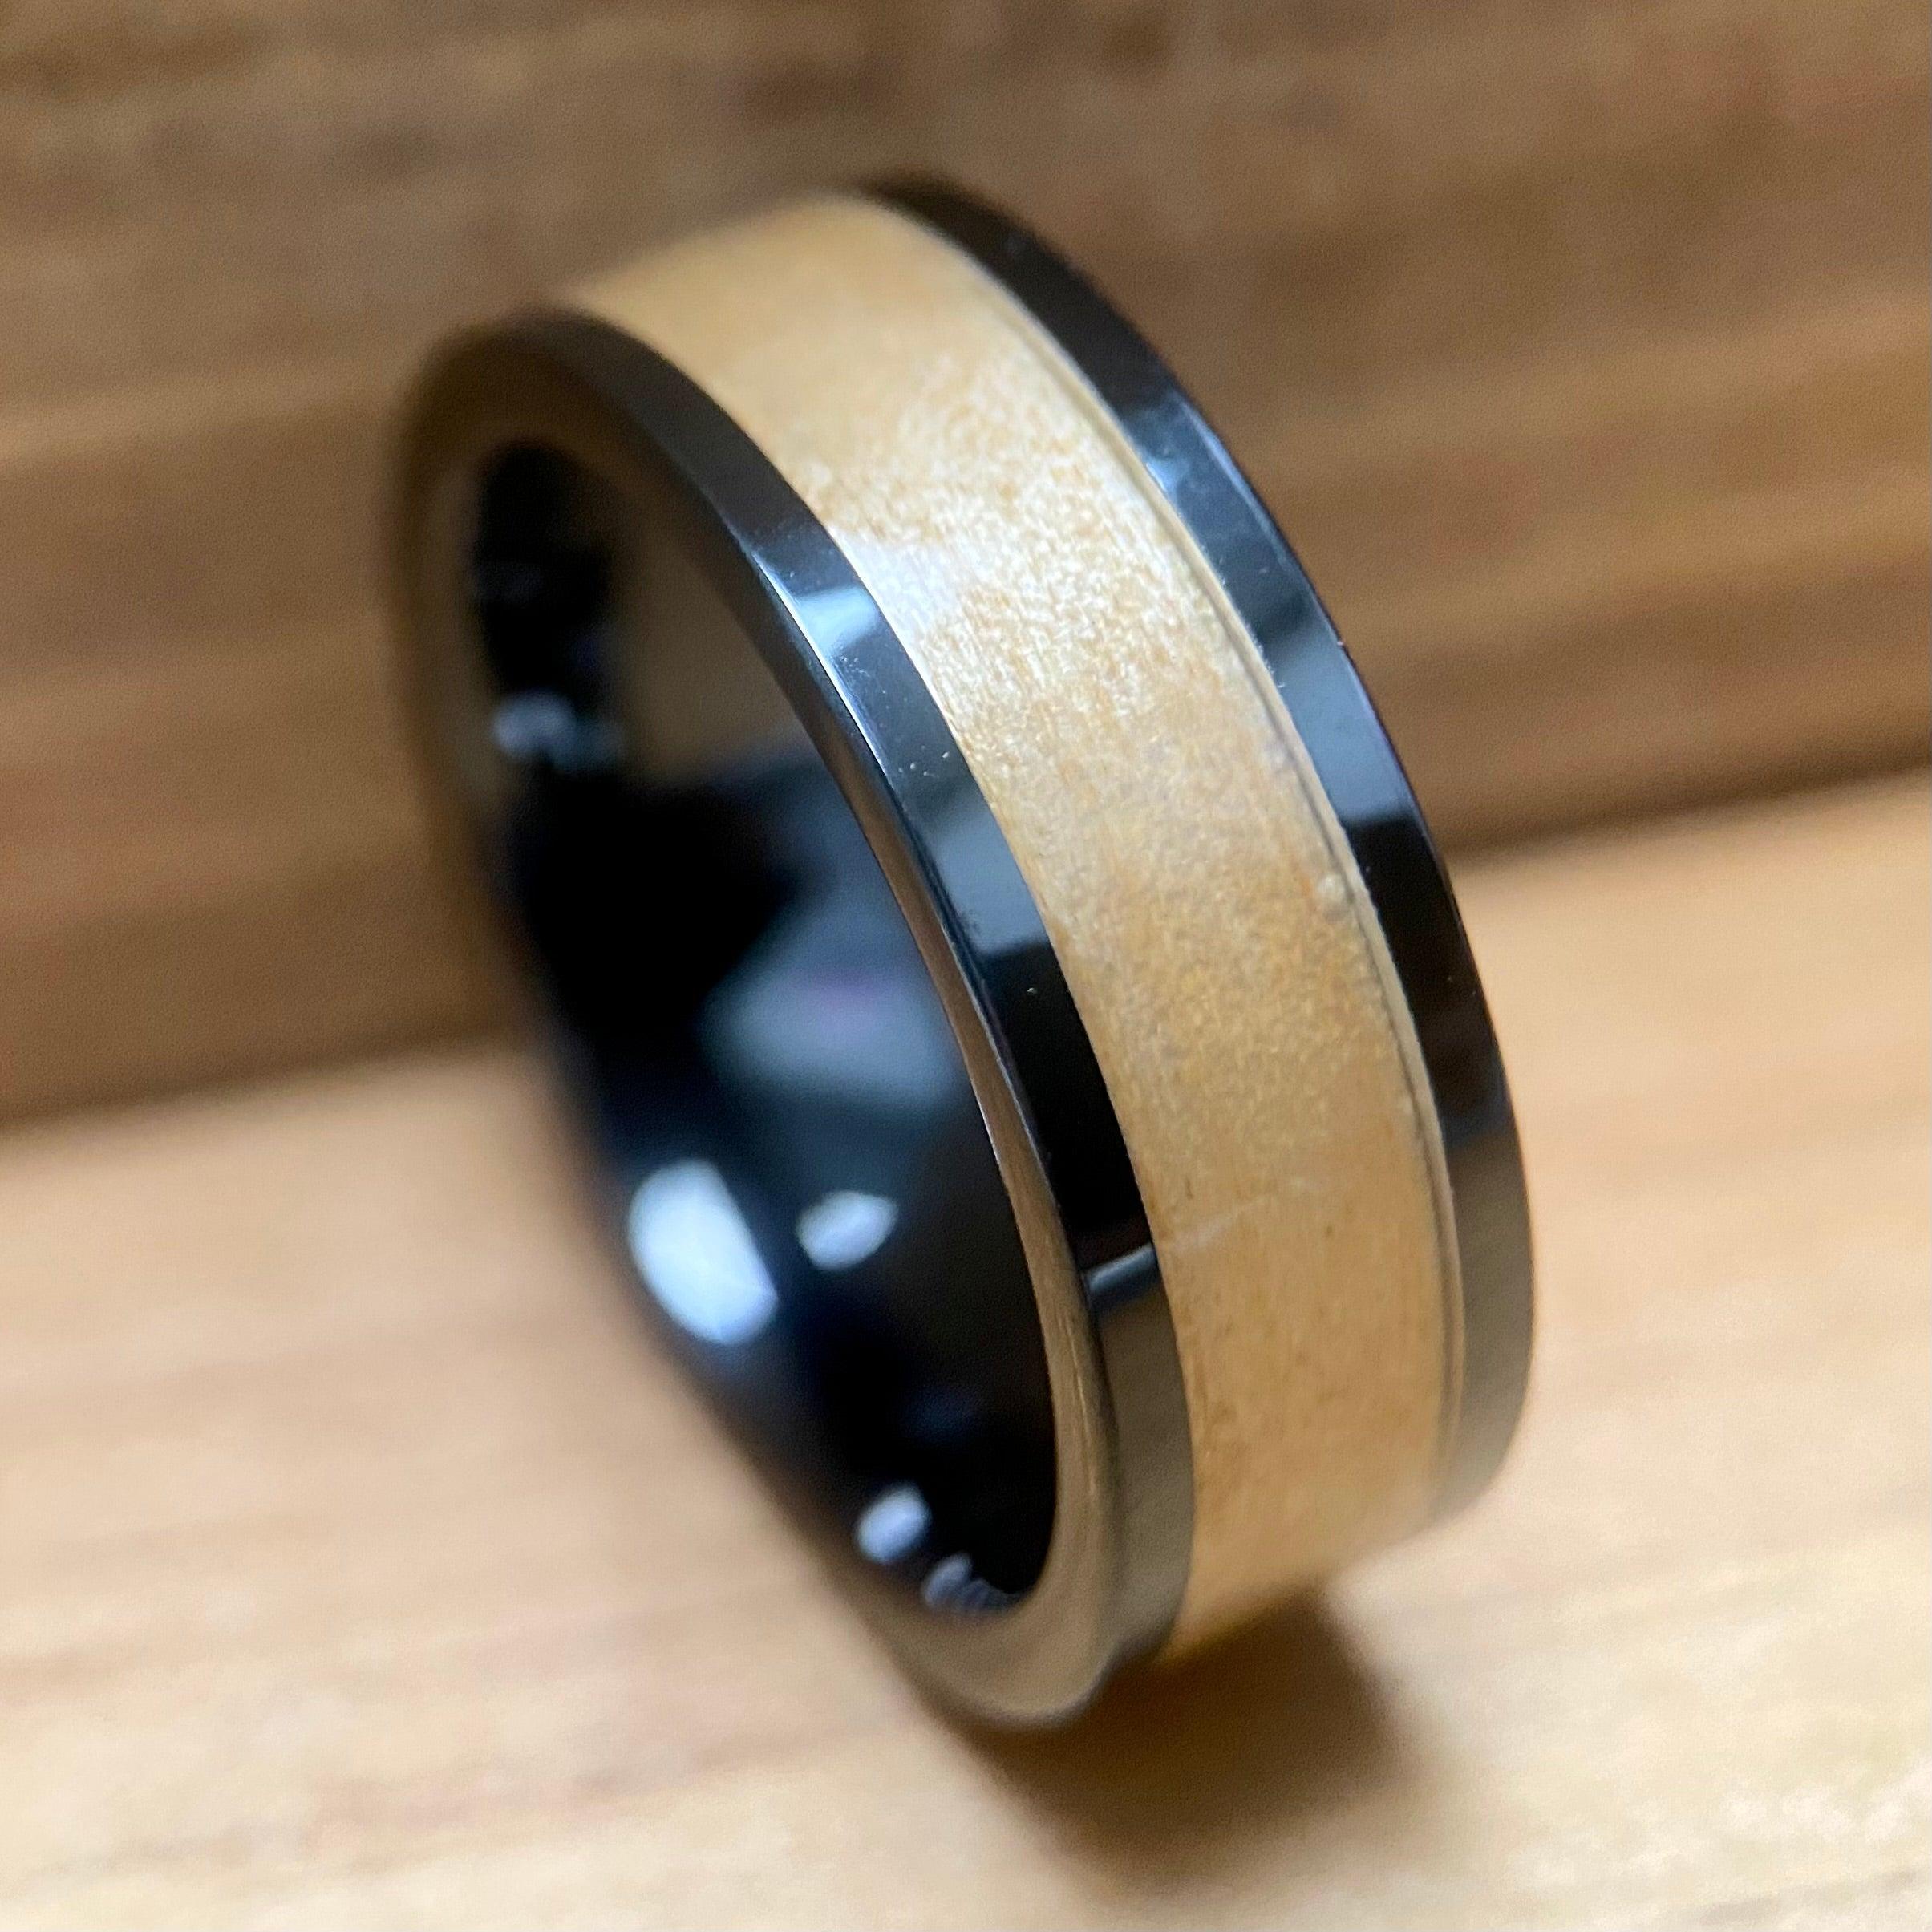 BW James Jewelers ALT Wedding Band "The Boston Grand Slam" 100% USA Made Black Ceramic Ring With Wood From Fenway Park